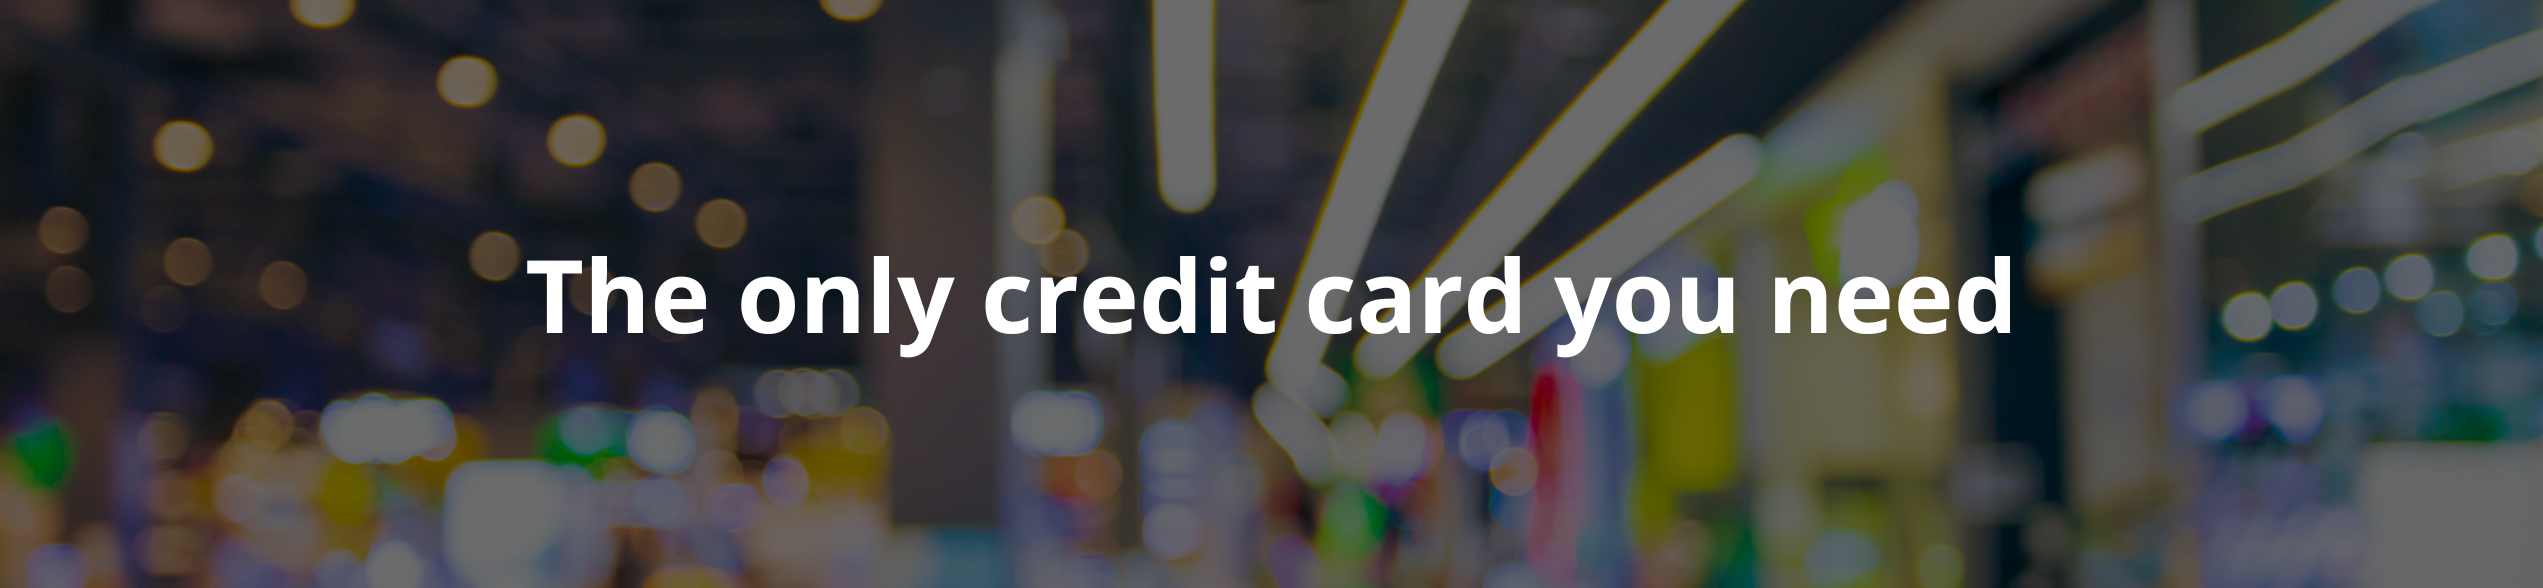 CAFCU has you covered with our low-rate credit card